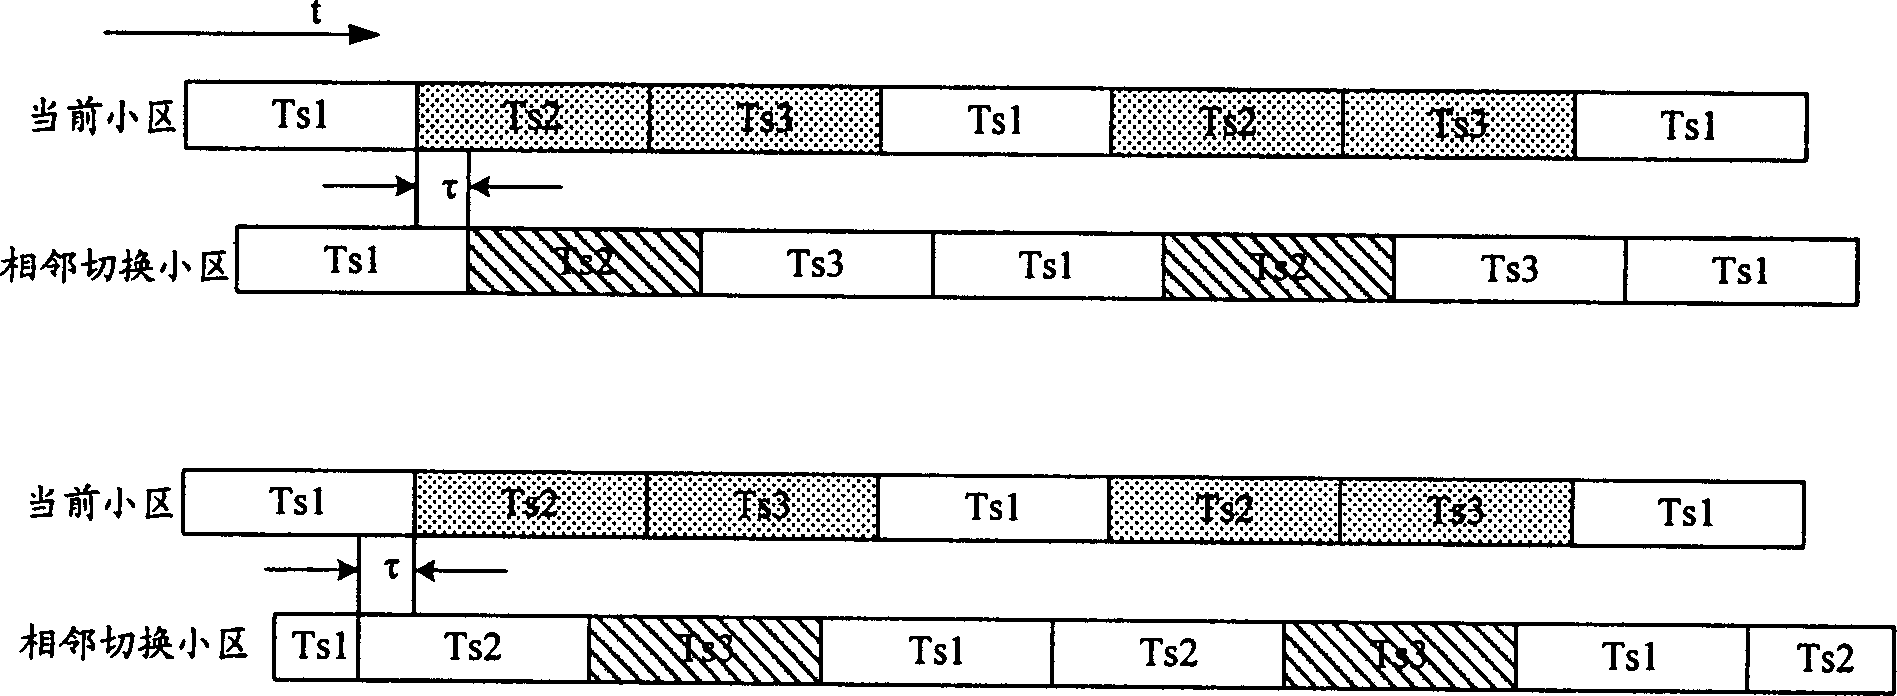 Method for realizing intercell soft switching in OFDM system